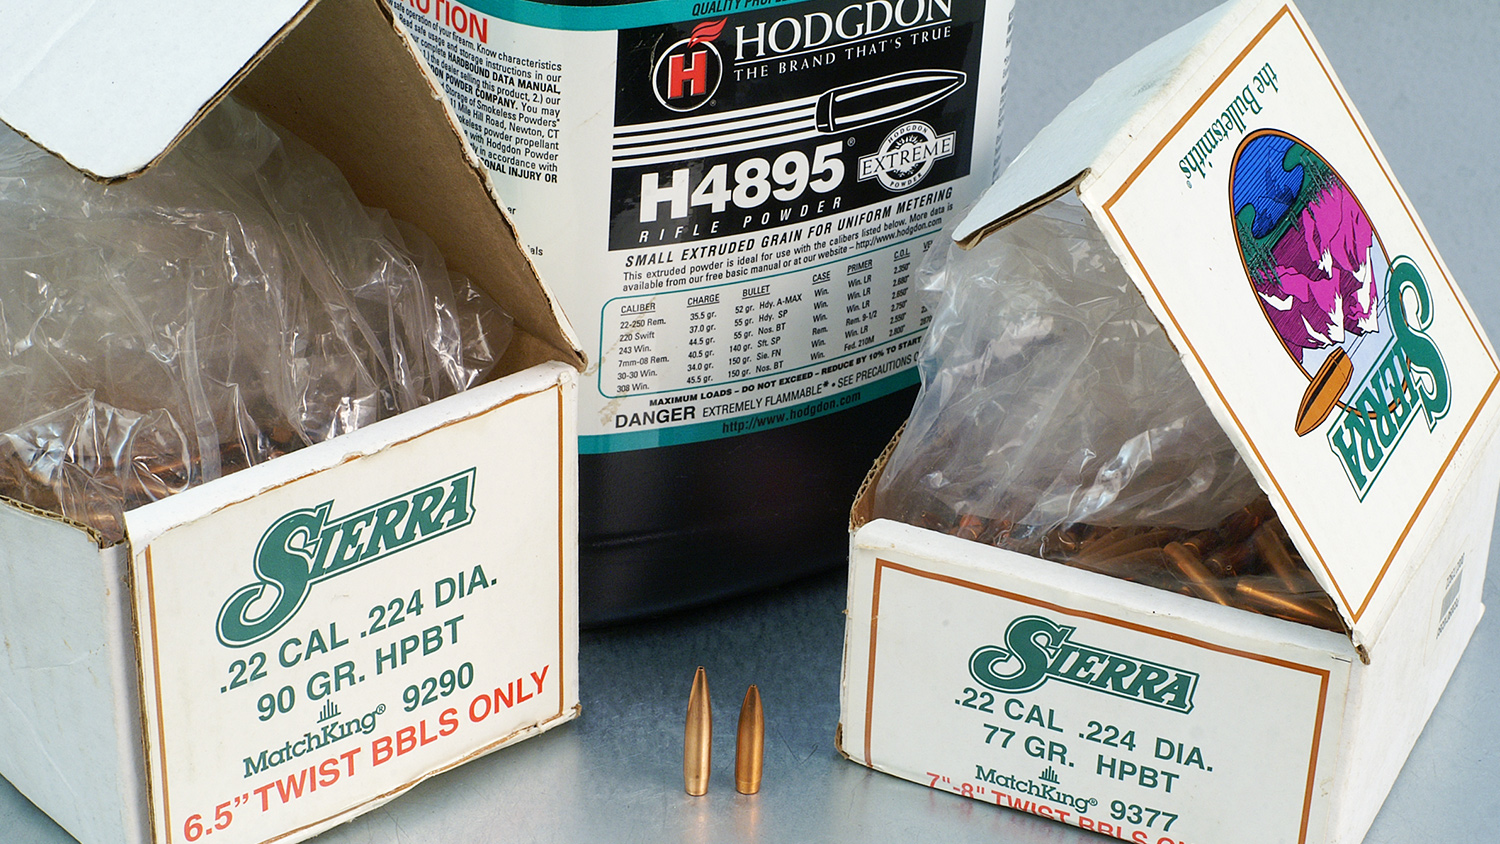 Consistency is key for long range high power rifle ammo